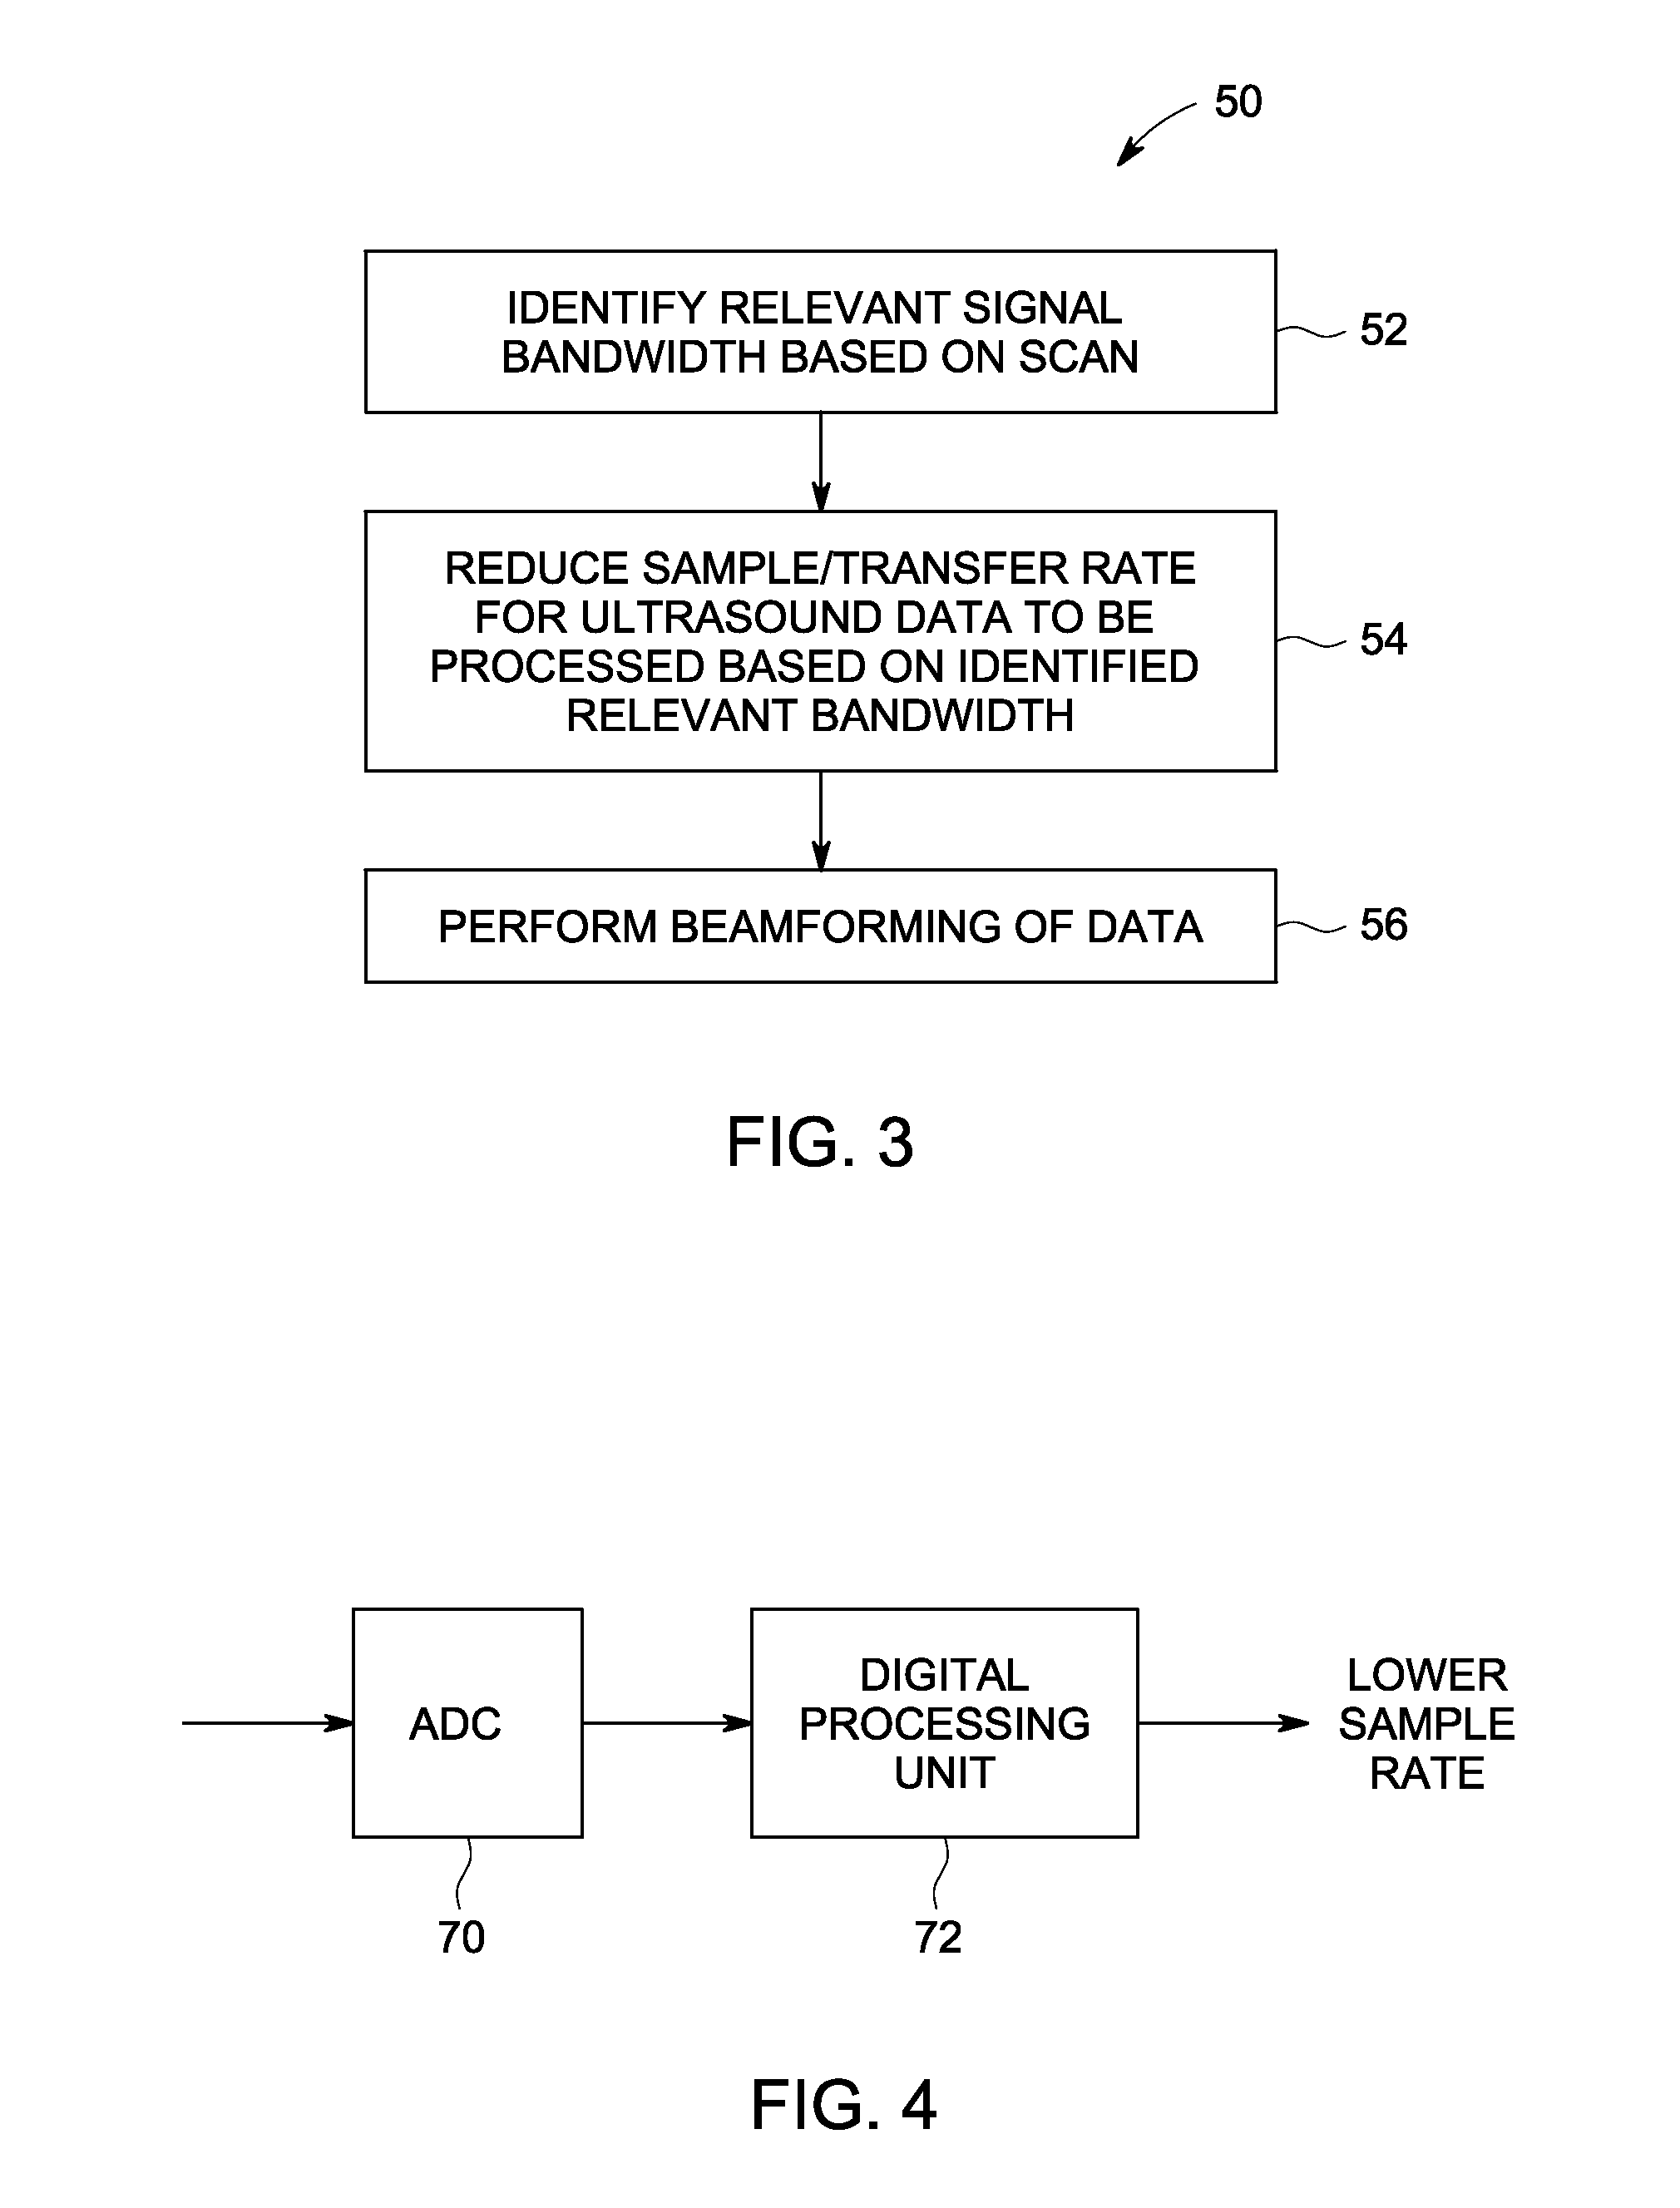 Method and system for controlling communication of data in an ultrasound system